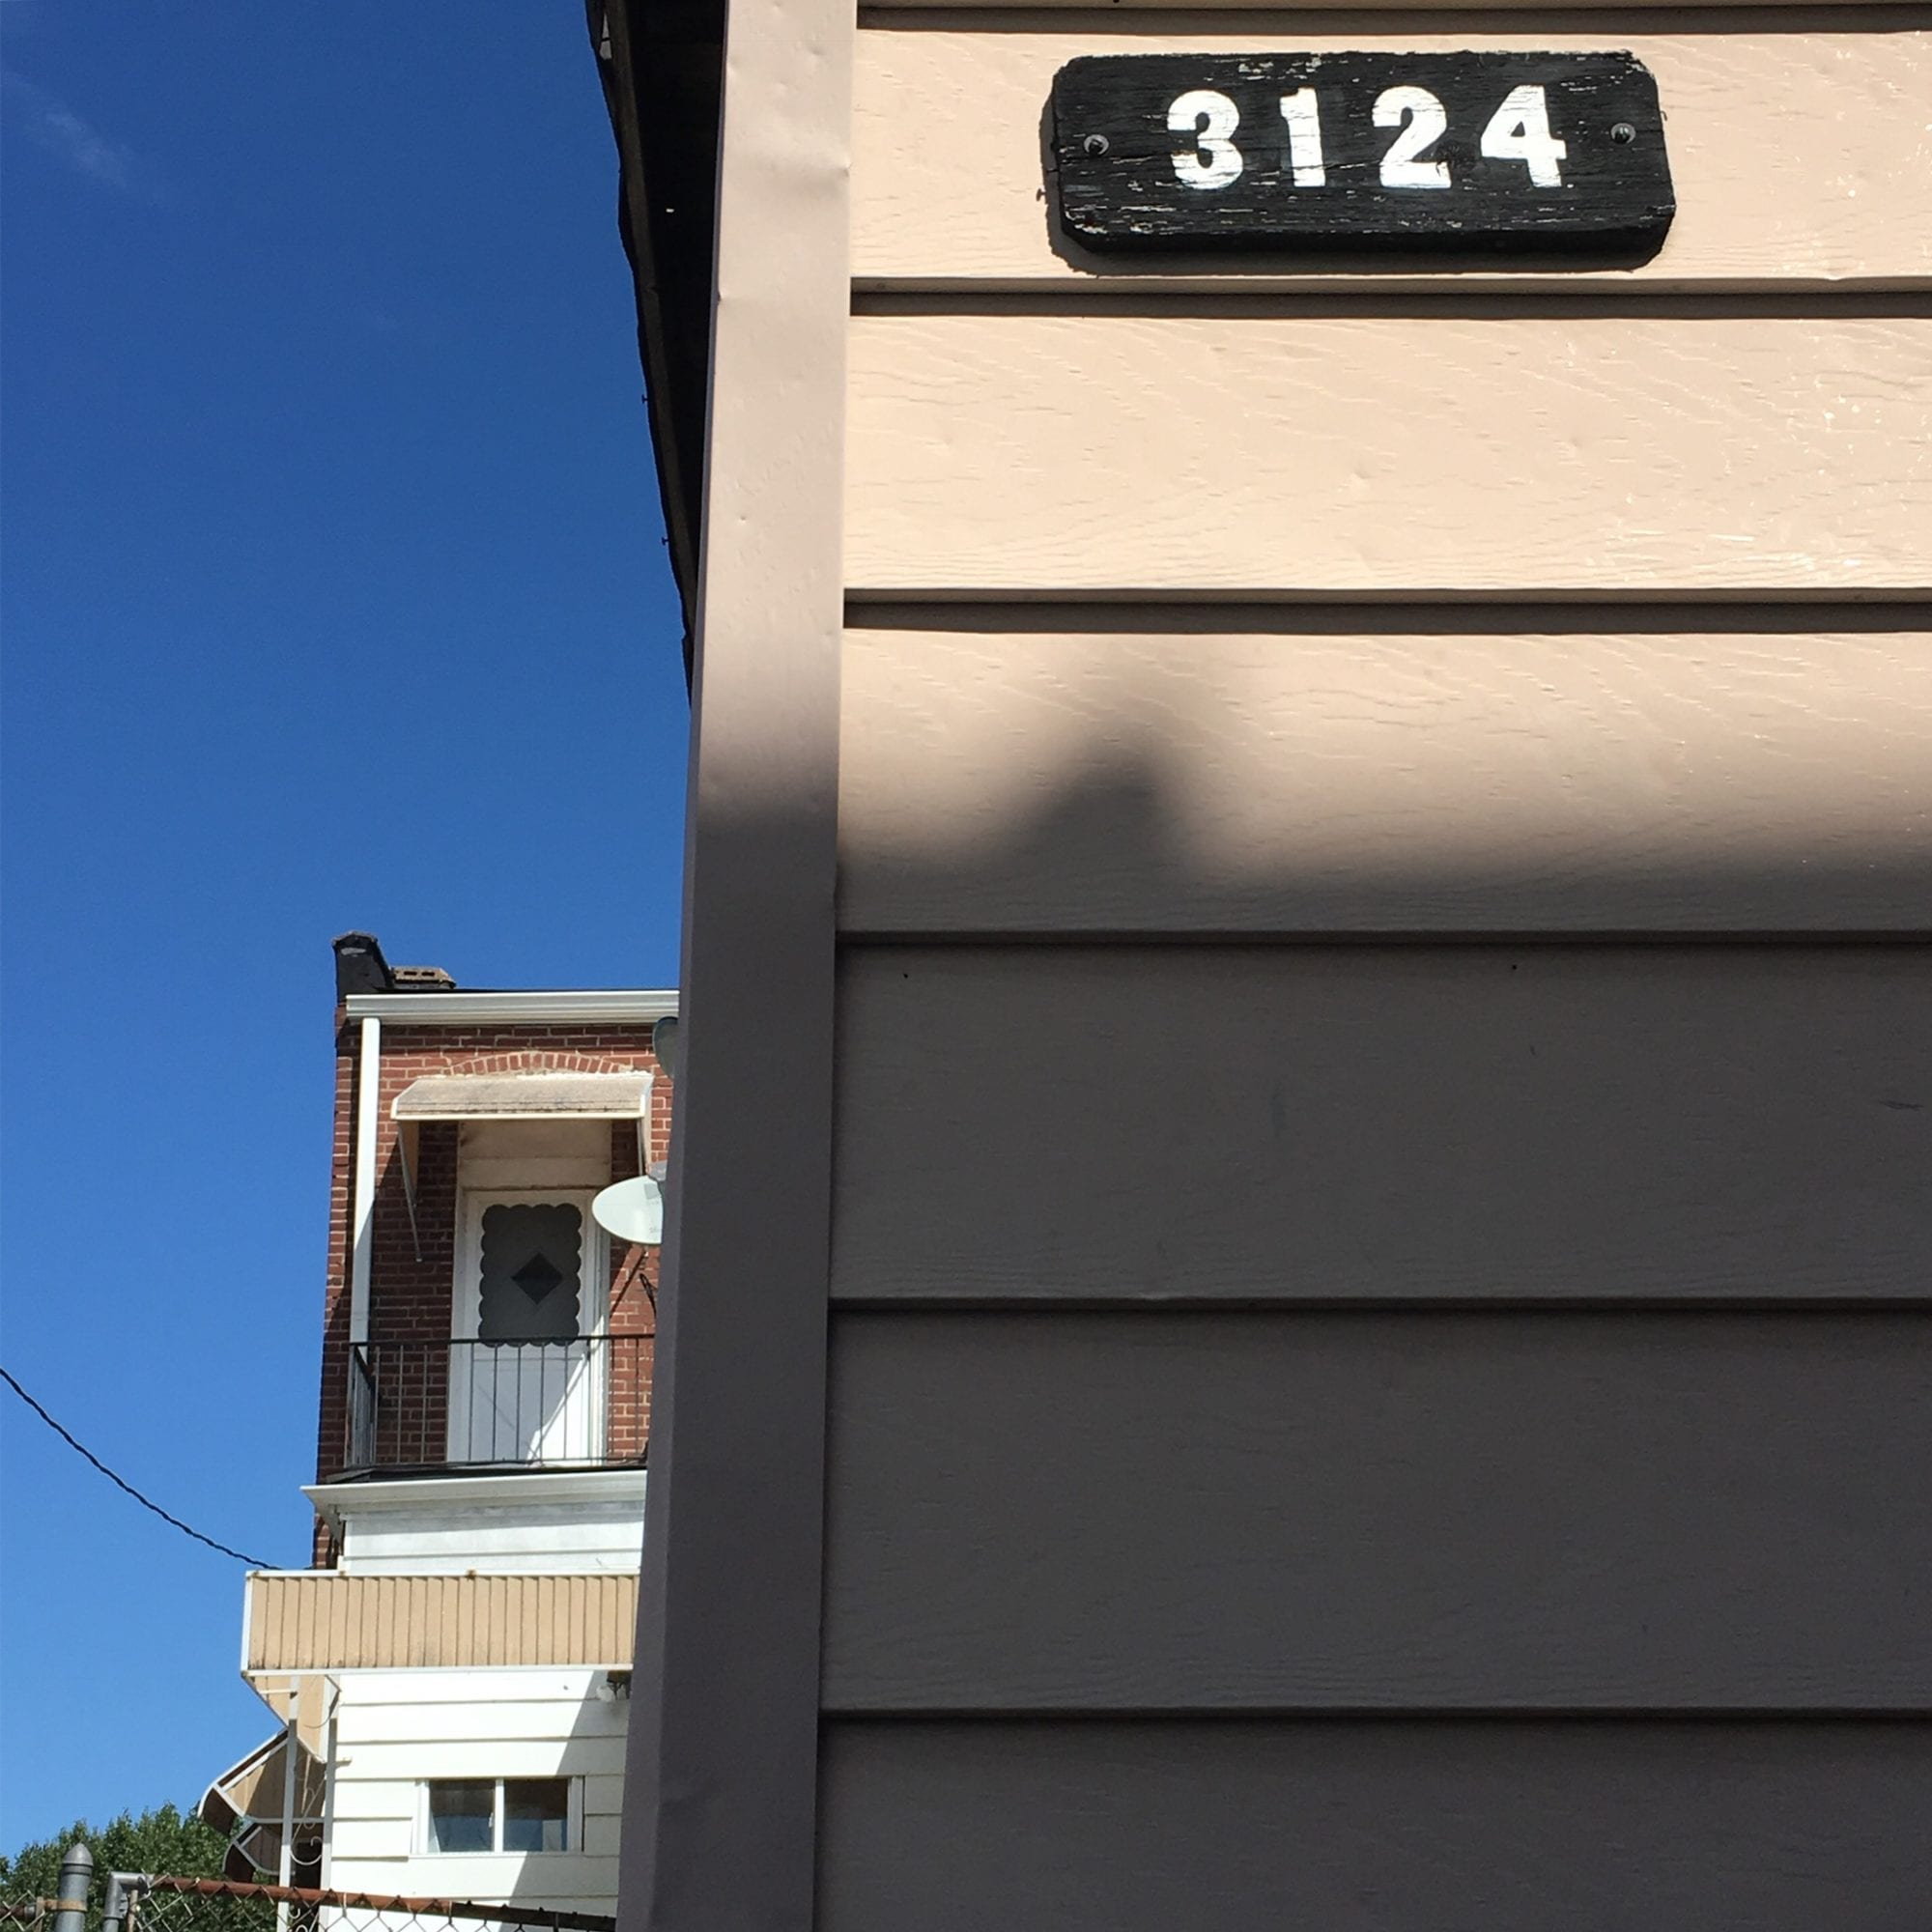 3124, house numbers in Dutchtown, St. Louis. Photo by Josh Burbridge.